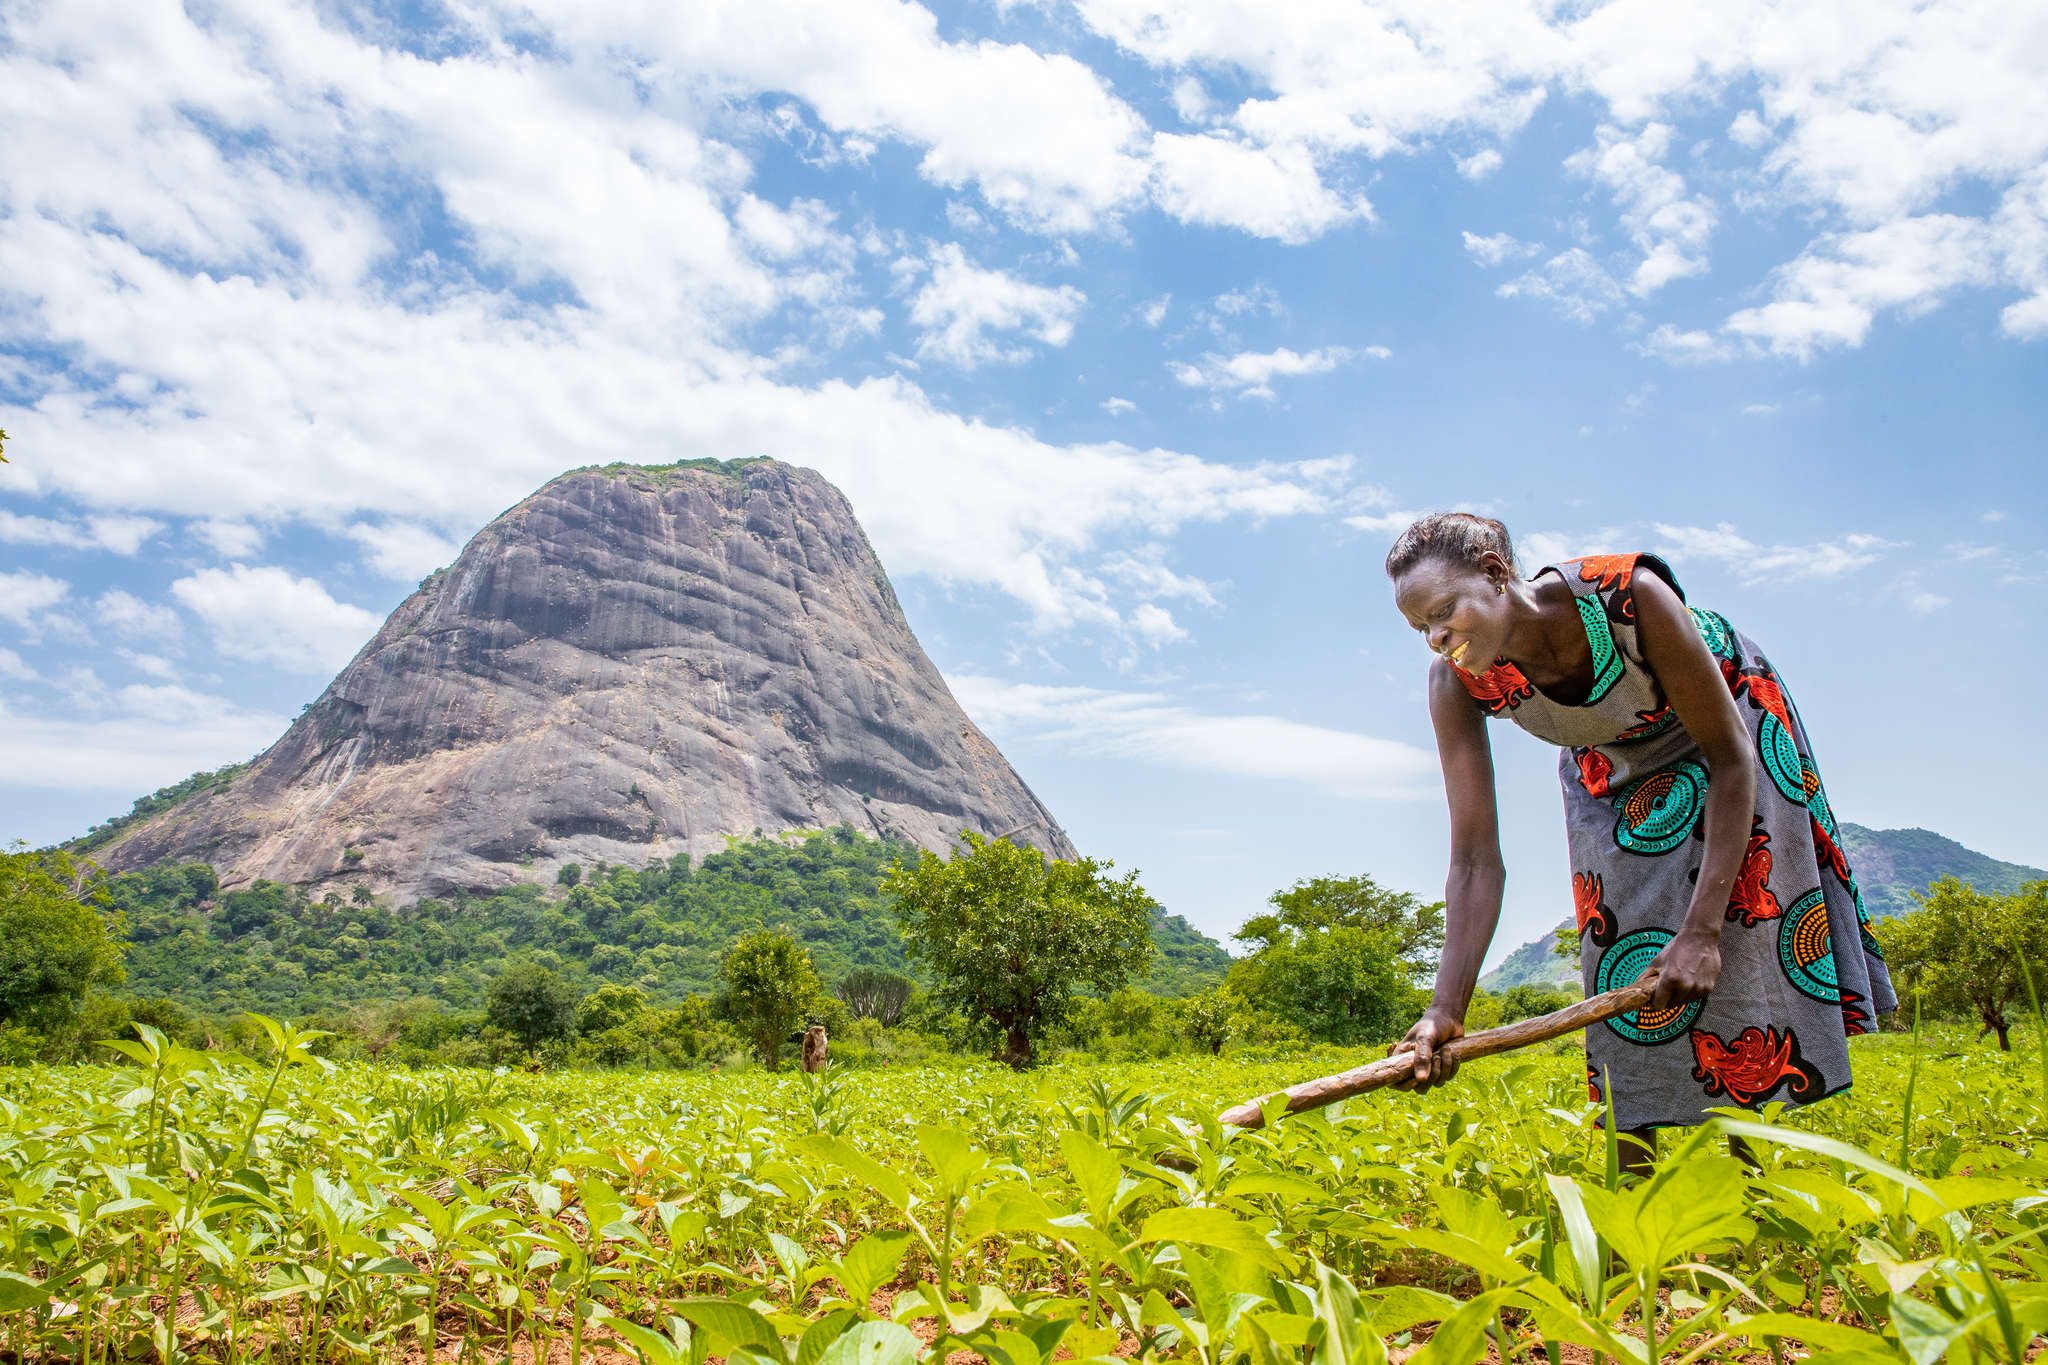 A person weeds crops on their land in uganda.